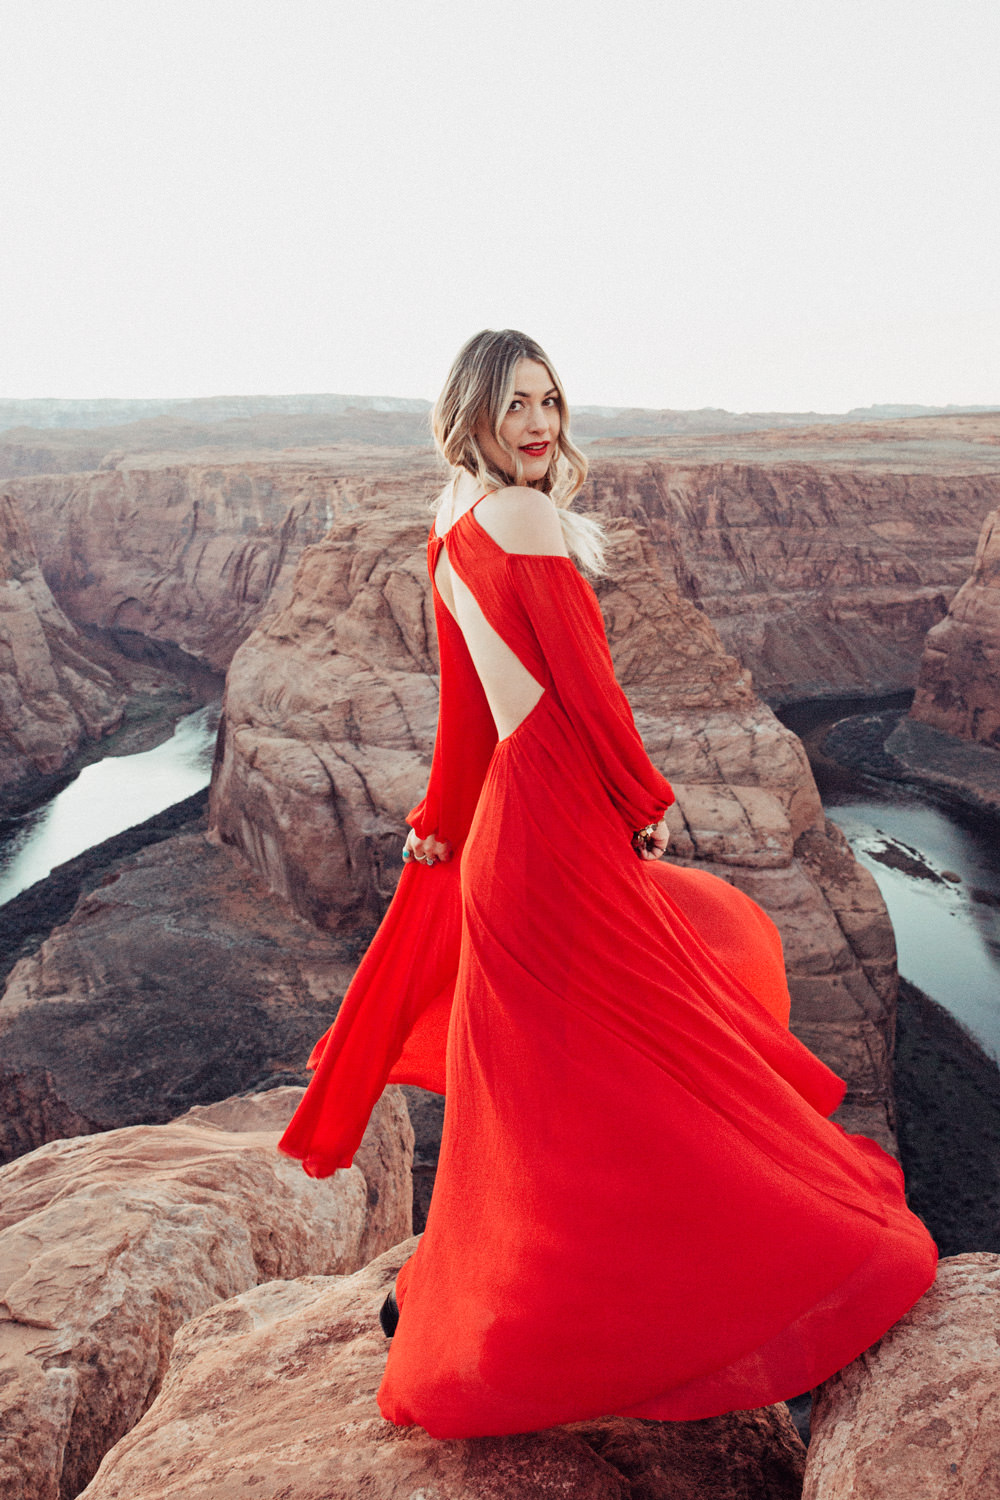 Caitlin Lindquist of the travel blog Dash of Darling shares her getaway to Horseshoe Bend in Arizona